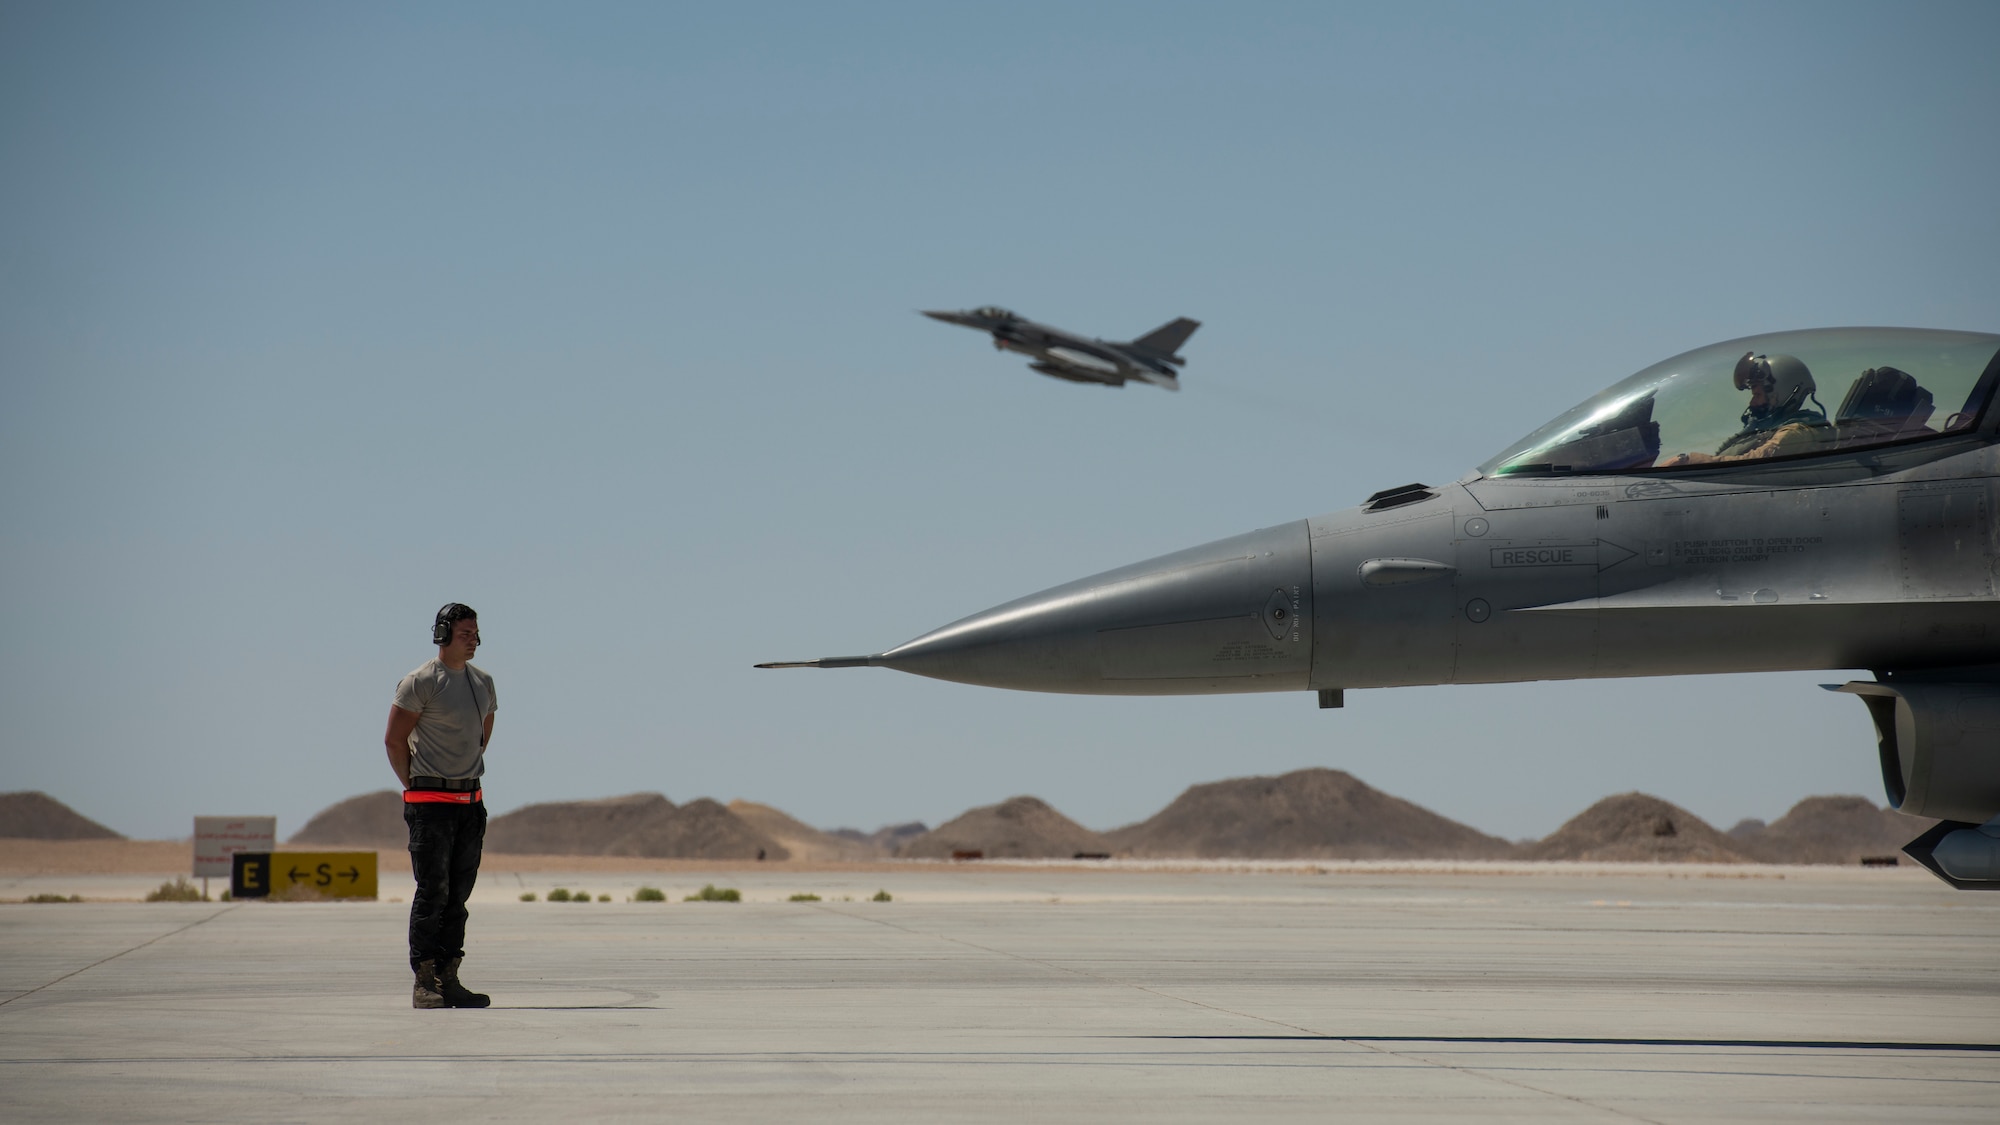 A U.S. Air Force crew chief with the 380th Expeditionary Aircraft Maintenance Squadron prepares to marshal U.S. Air Force Capt. Nomad D’Agostino, an F-16 “Viper” Fighting Falcon pilot with the 79th Expeditionary Fighter Squadron, at an undisclosed location in the U.S. Central Command area of responsibility, Feb. 23, 2020.